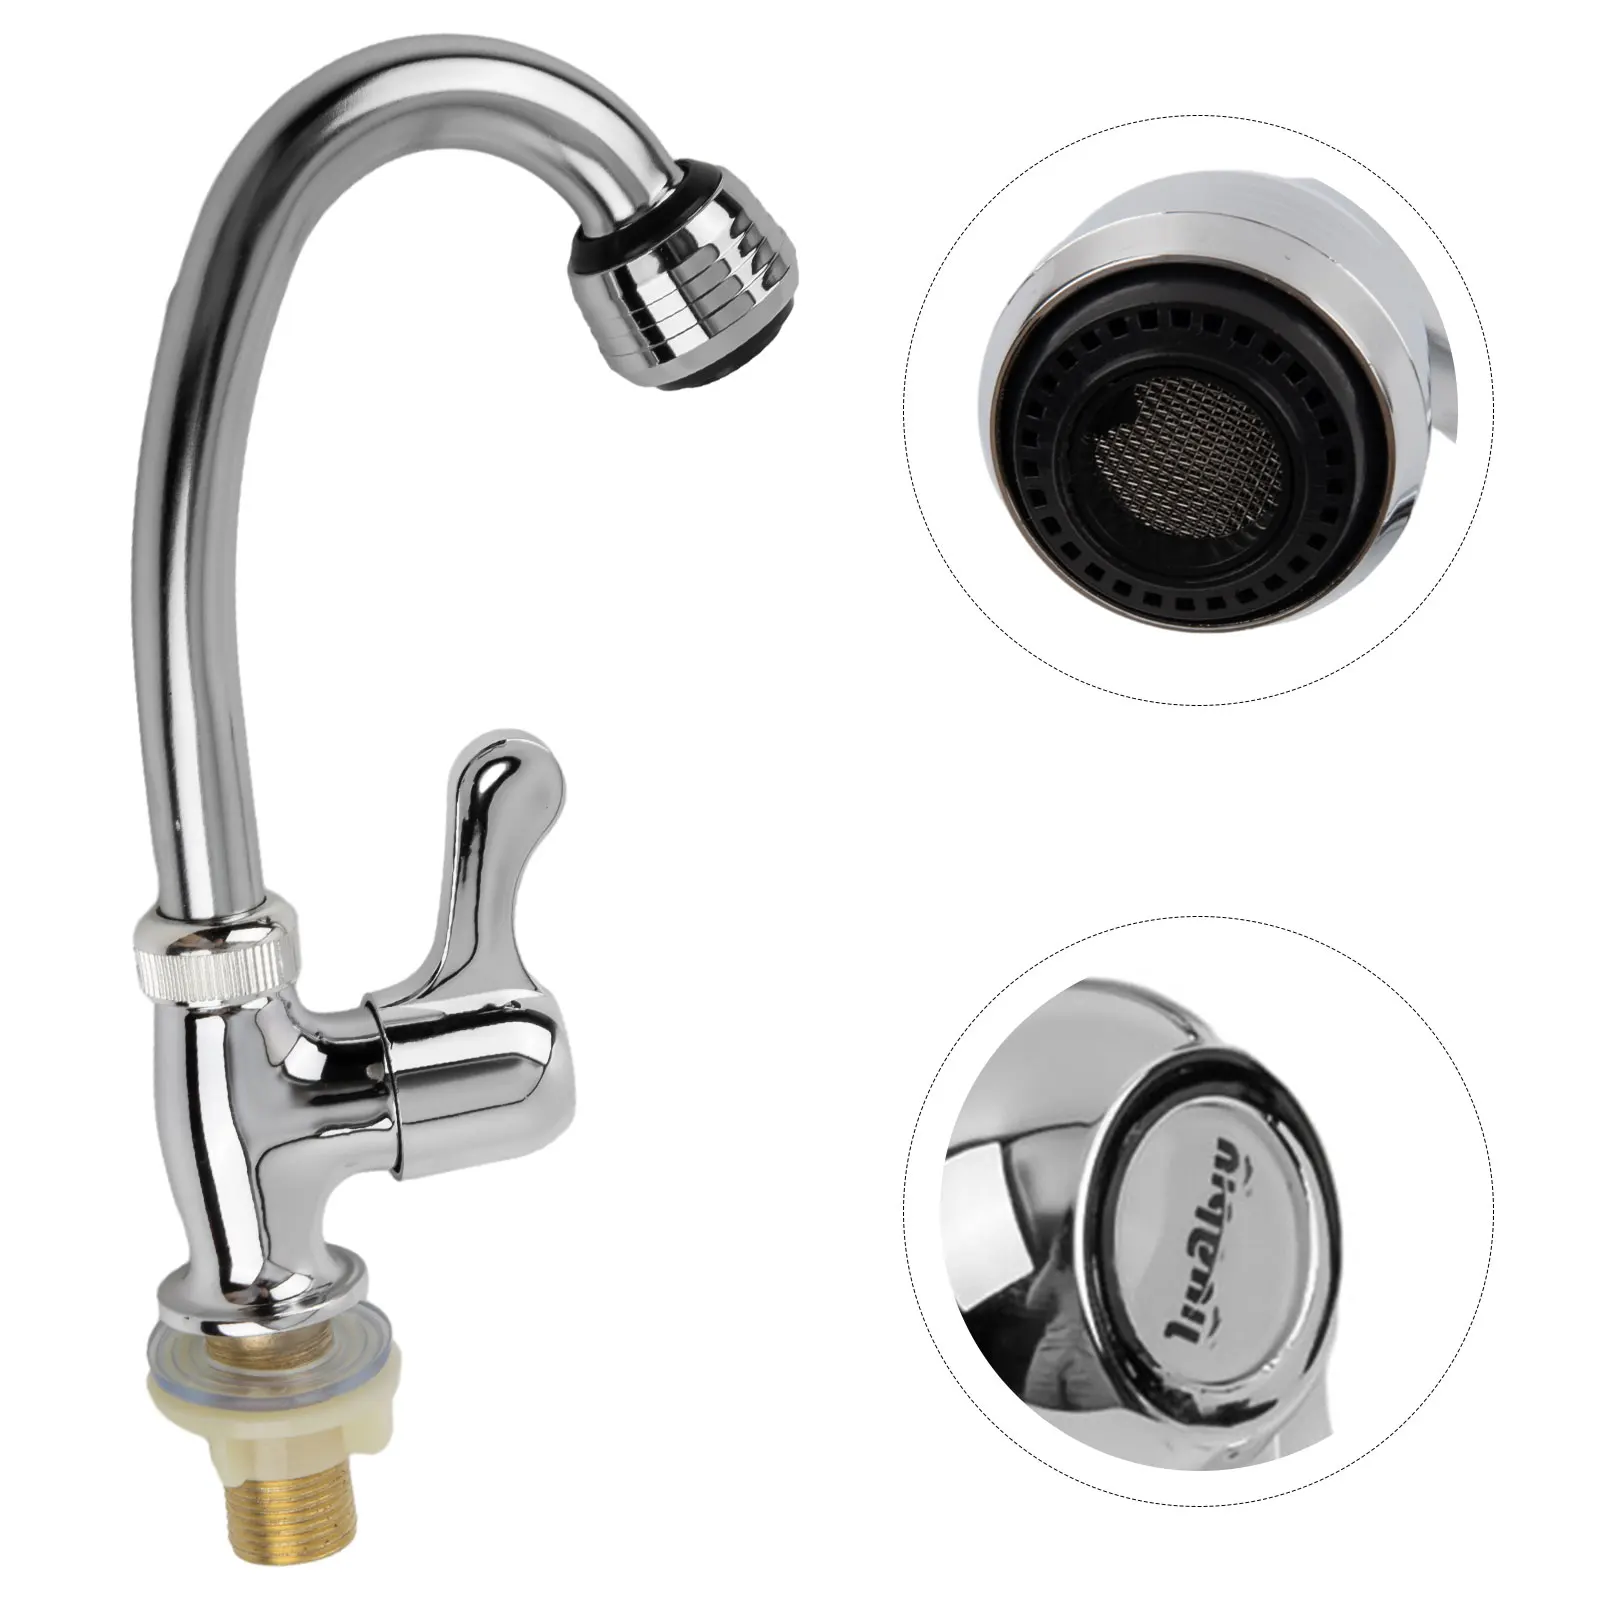 

Cold Tap Kitchen Faucet 1pc 360° Rotation Accessories Plastic Steel Silver Color Bathroom Accessories Brand New